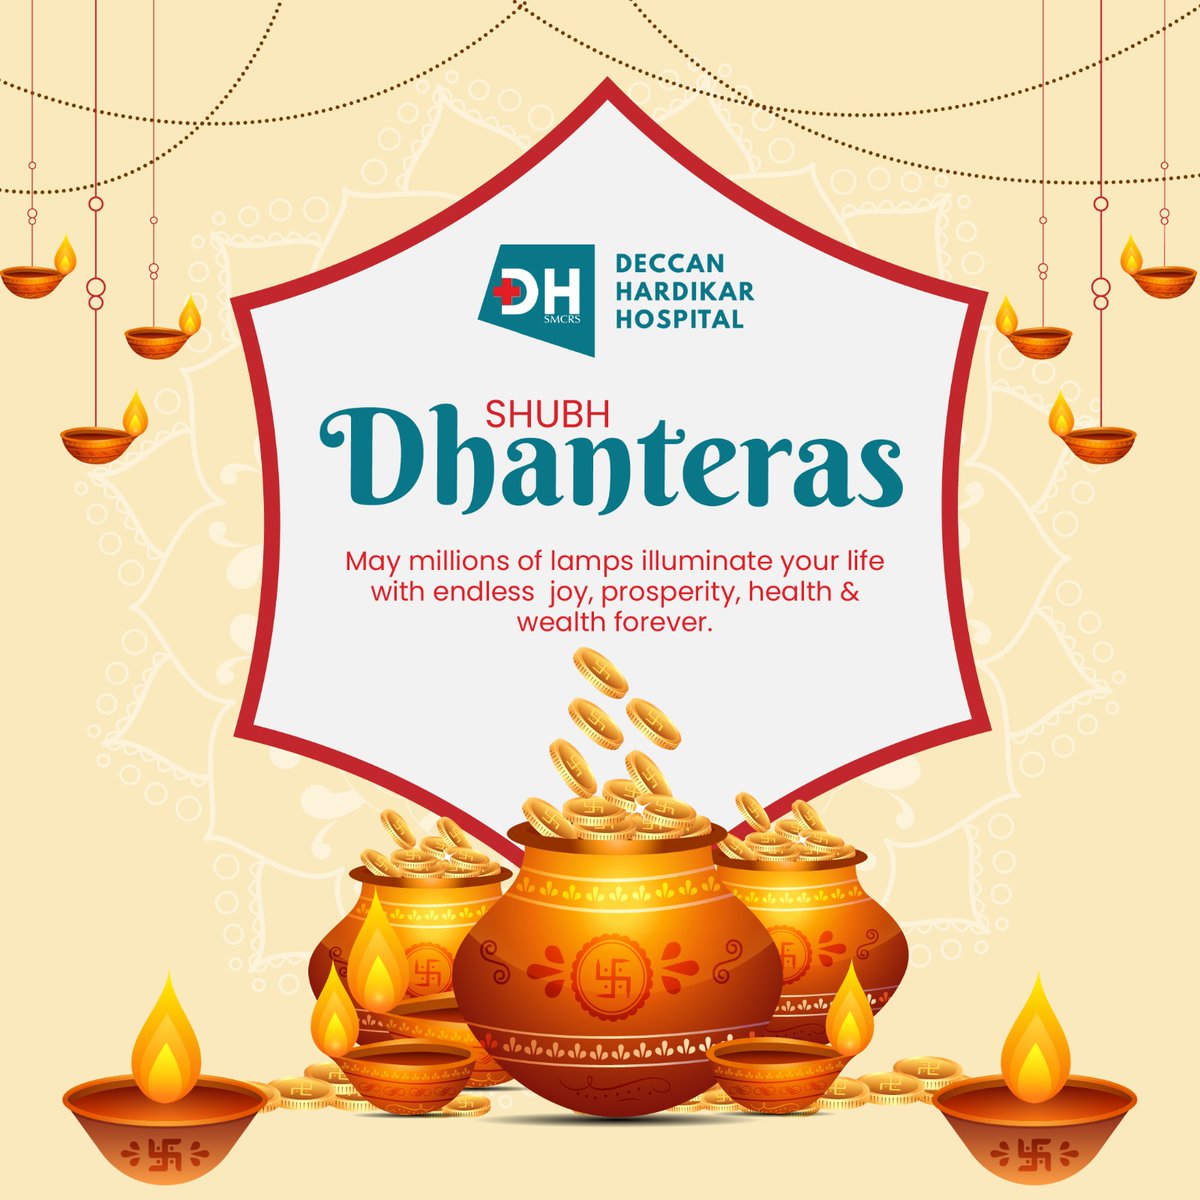 Wishing you and your loved ones a prosperous and joyous Dhanteras! May this auspicious occasion bring wealth, happiness, and good fortune into your lives. Happy Dhanteras! #Dhanteras #prosperity #diwalivibes #celebrations #festivevibes